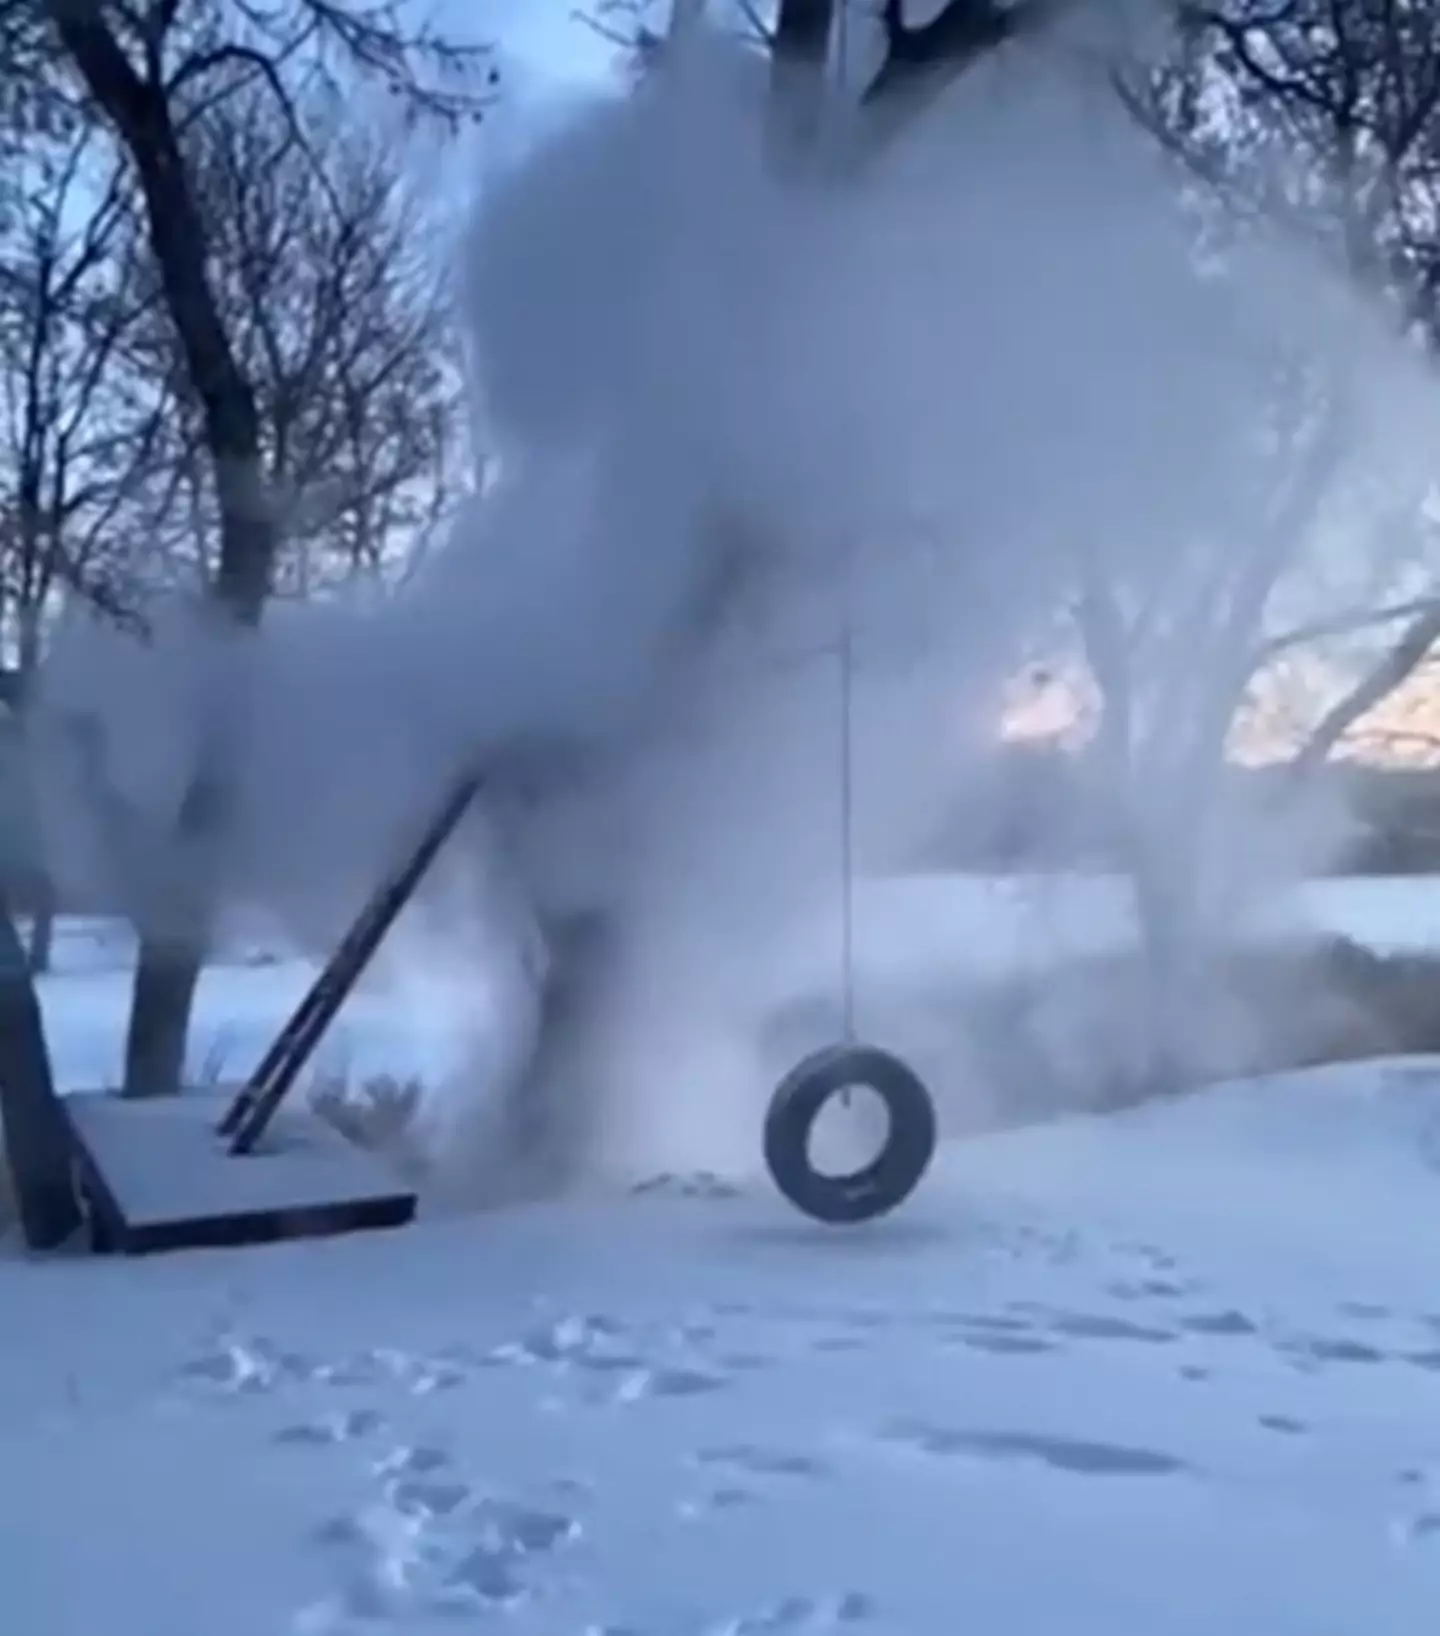 The boiling water was instantly transformed into snow.